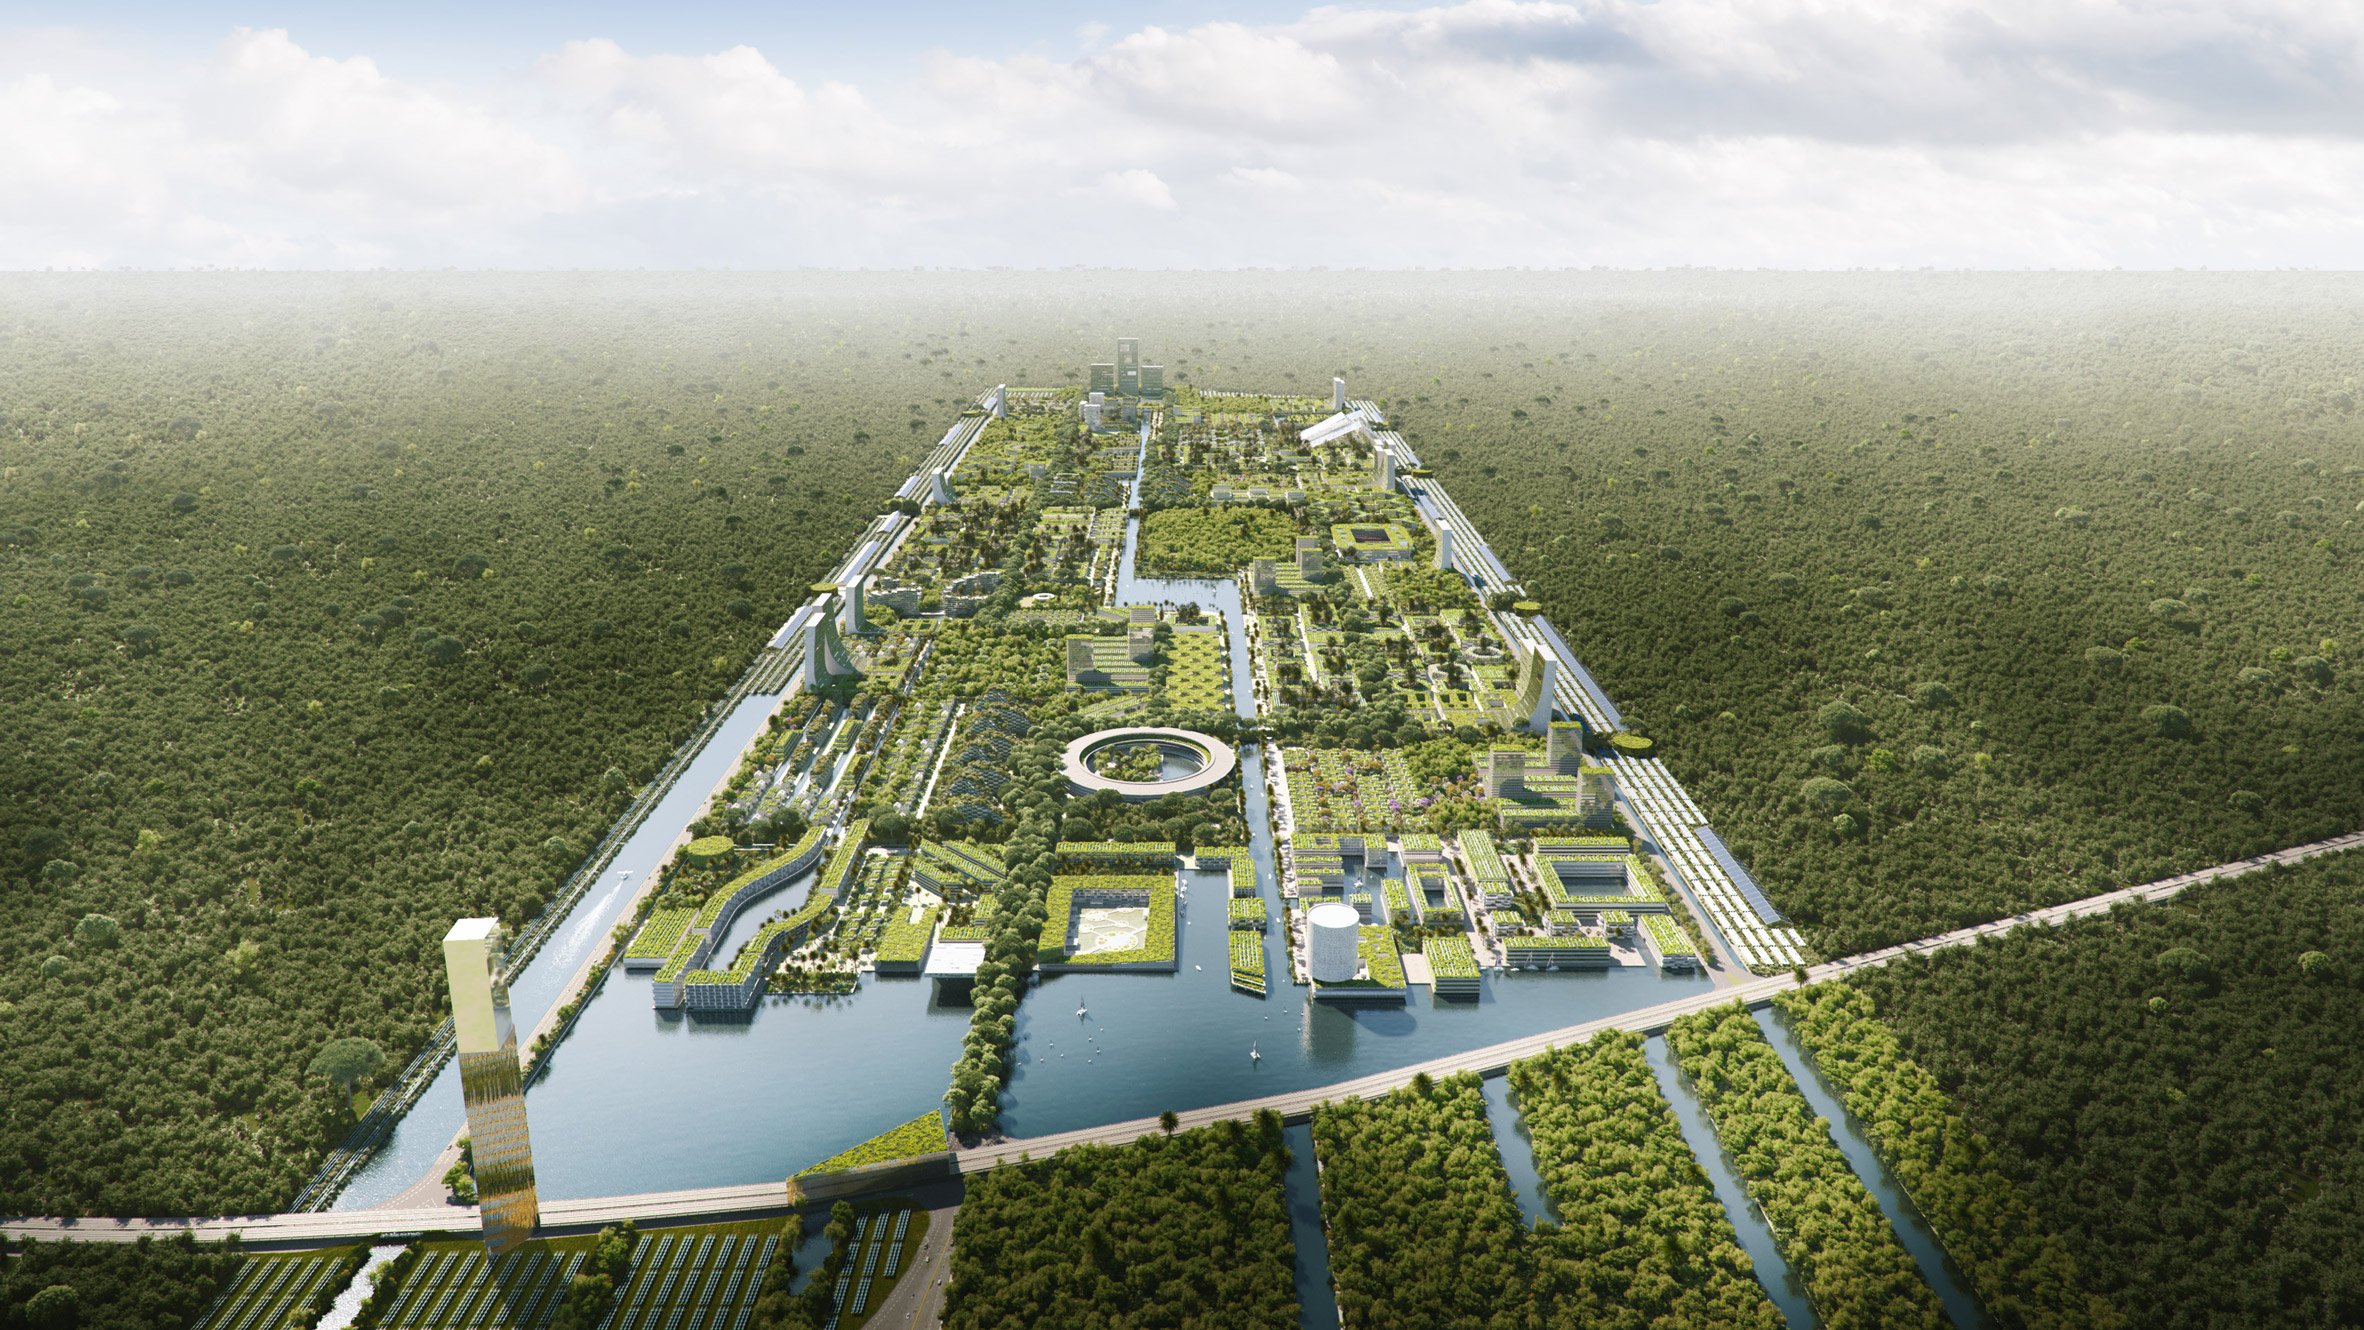 Smart Forest City in Mexico by Stefano Boeri